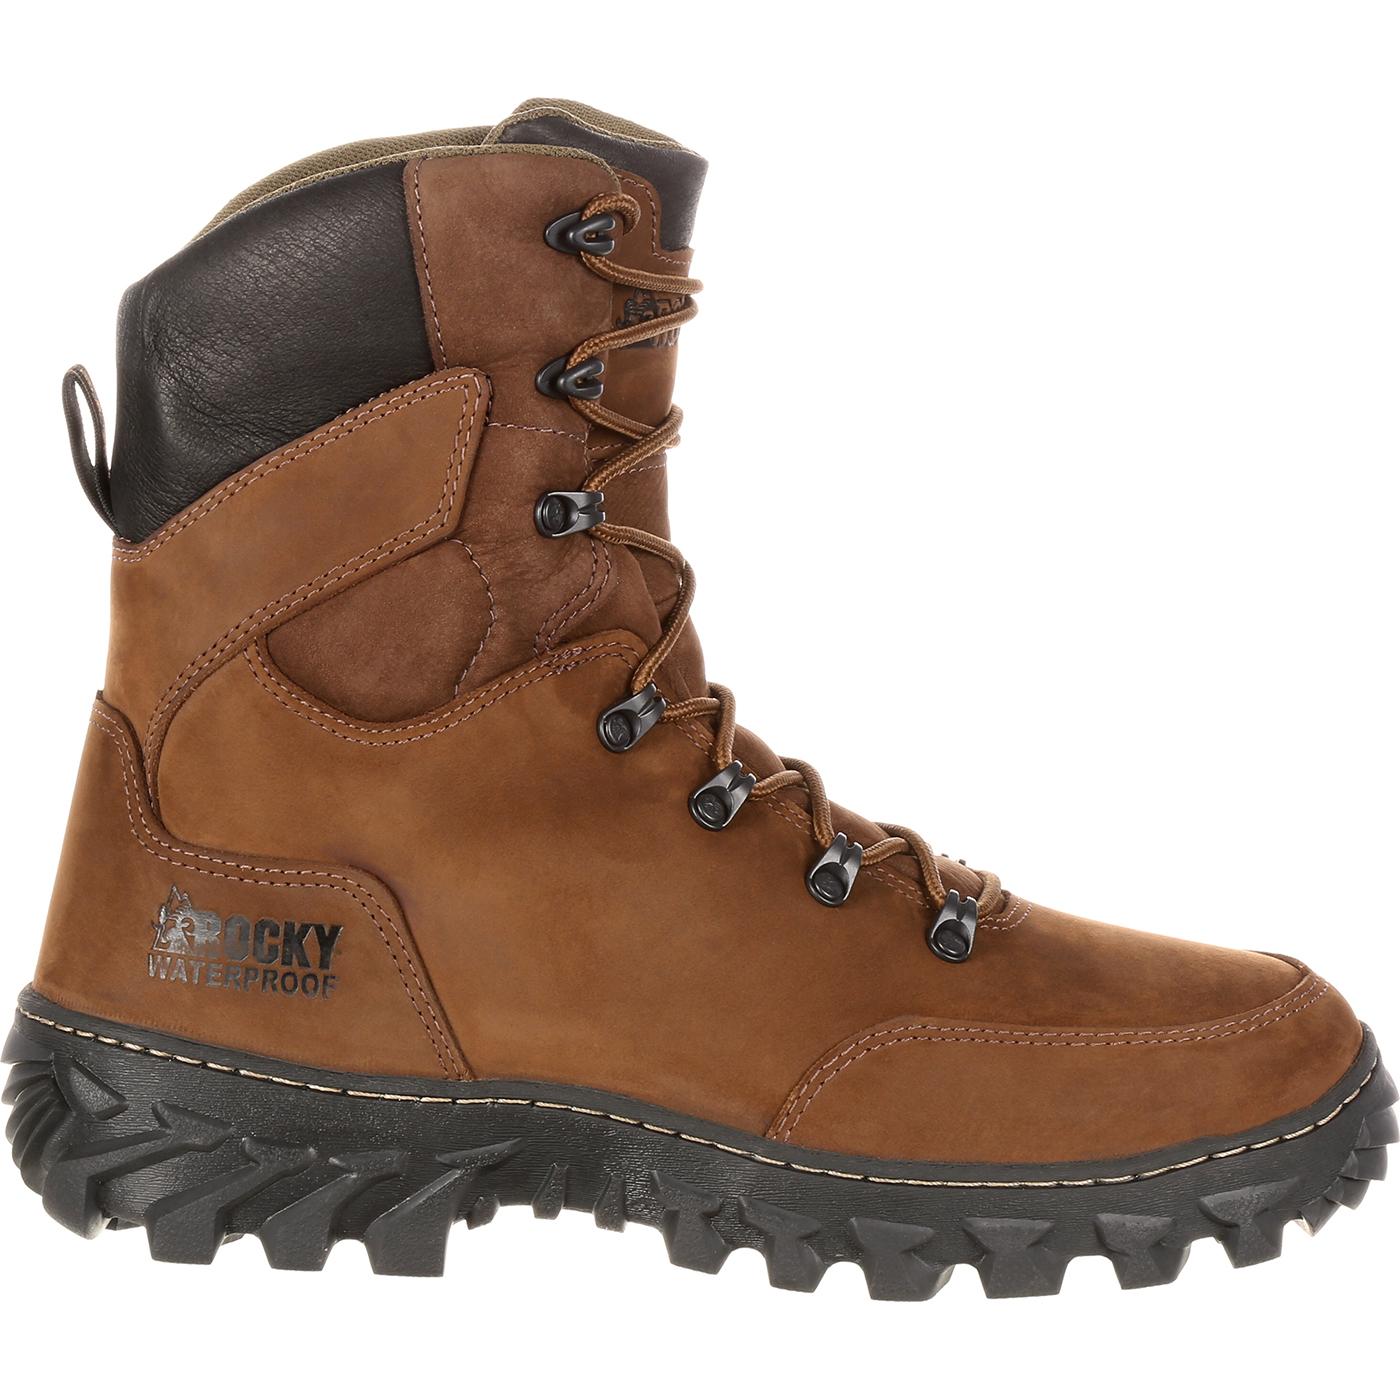 Rocky Jungle Hunter: Insulated Waterproof Outdoor Boots